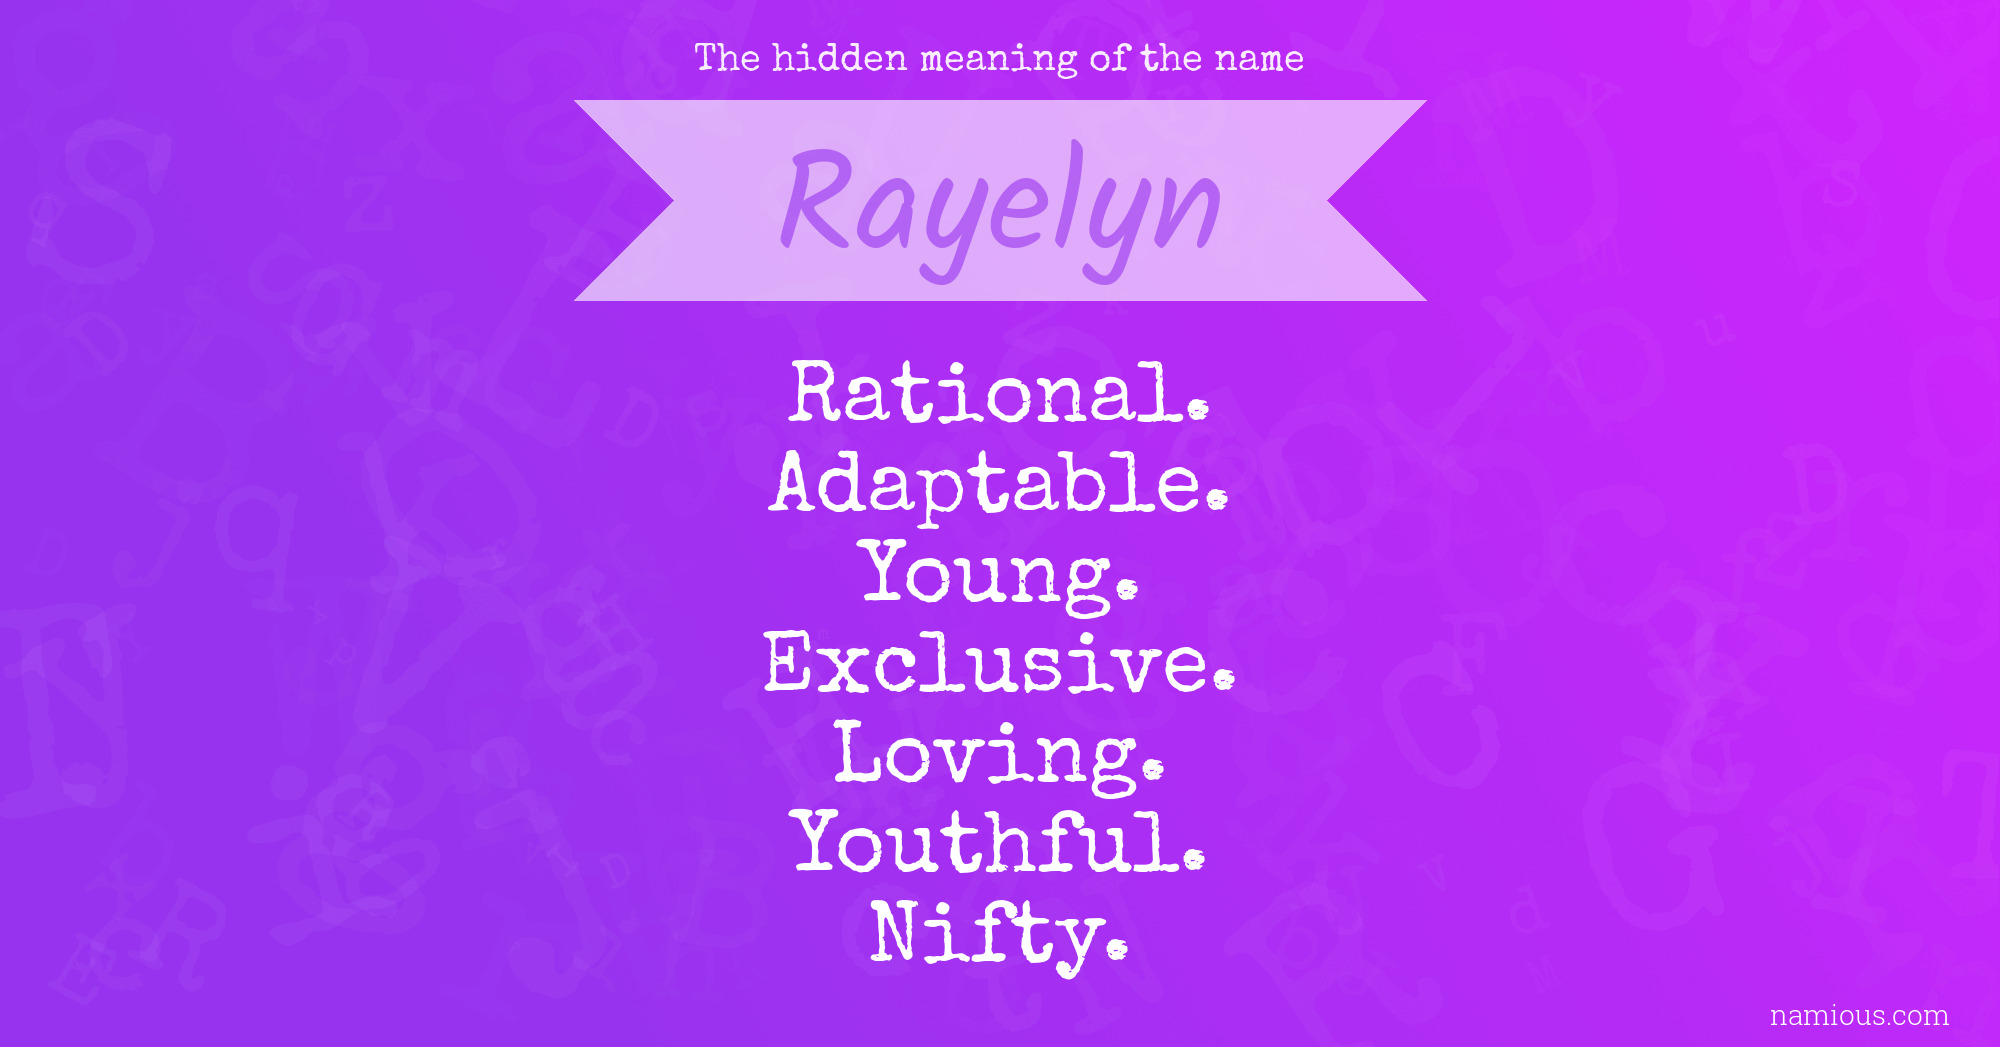 The hidden meaning of the name Rayelyn